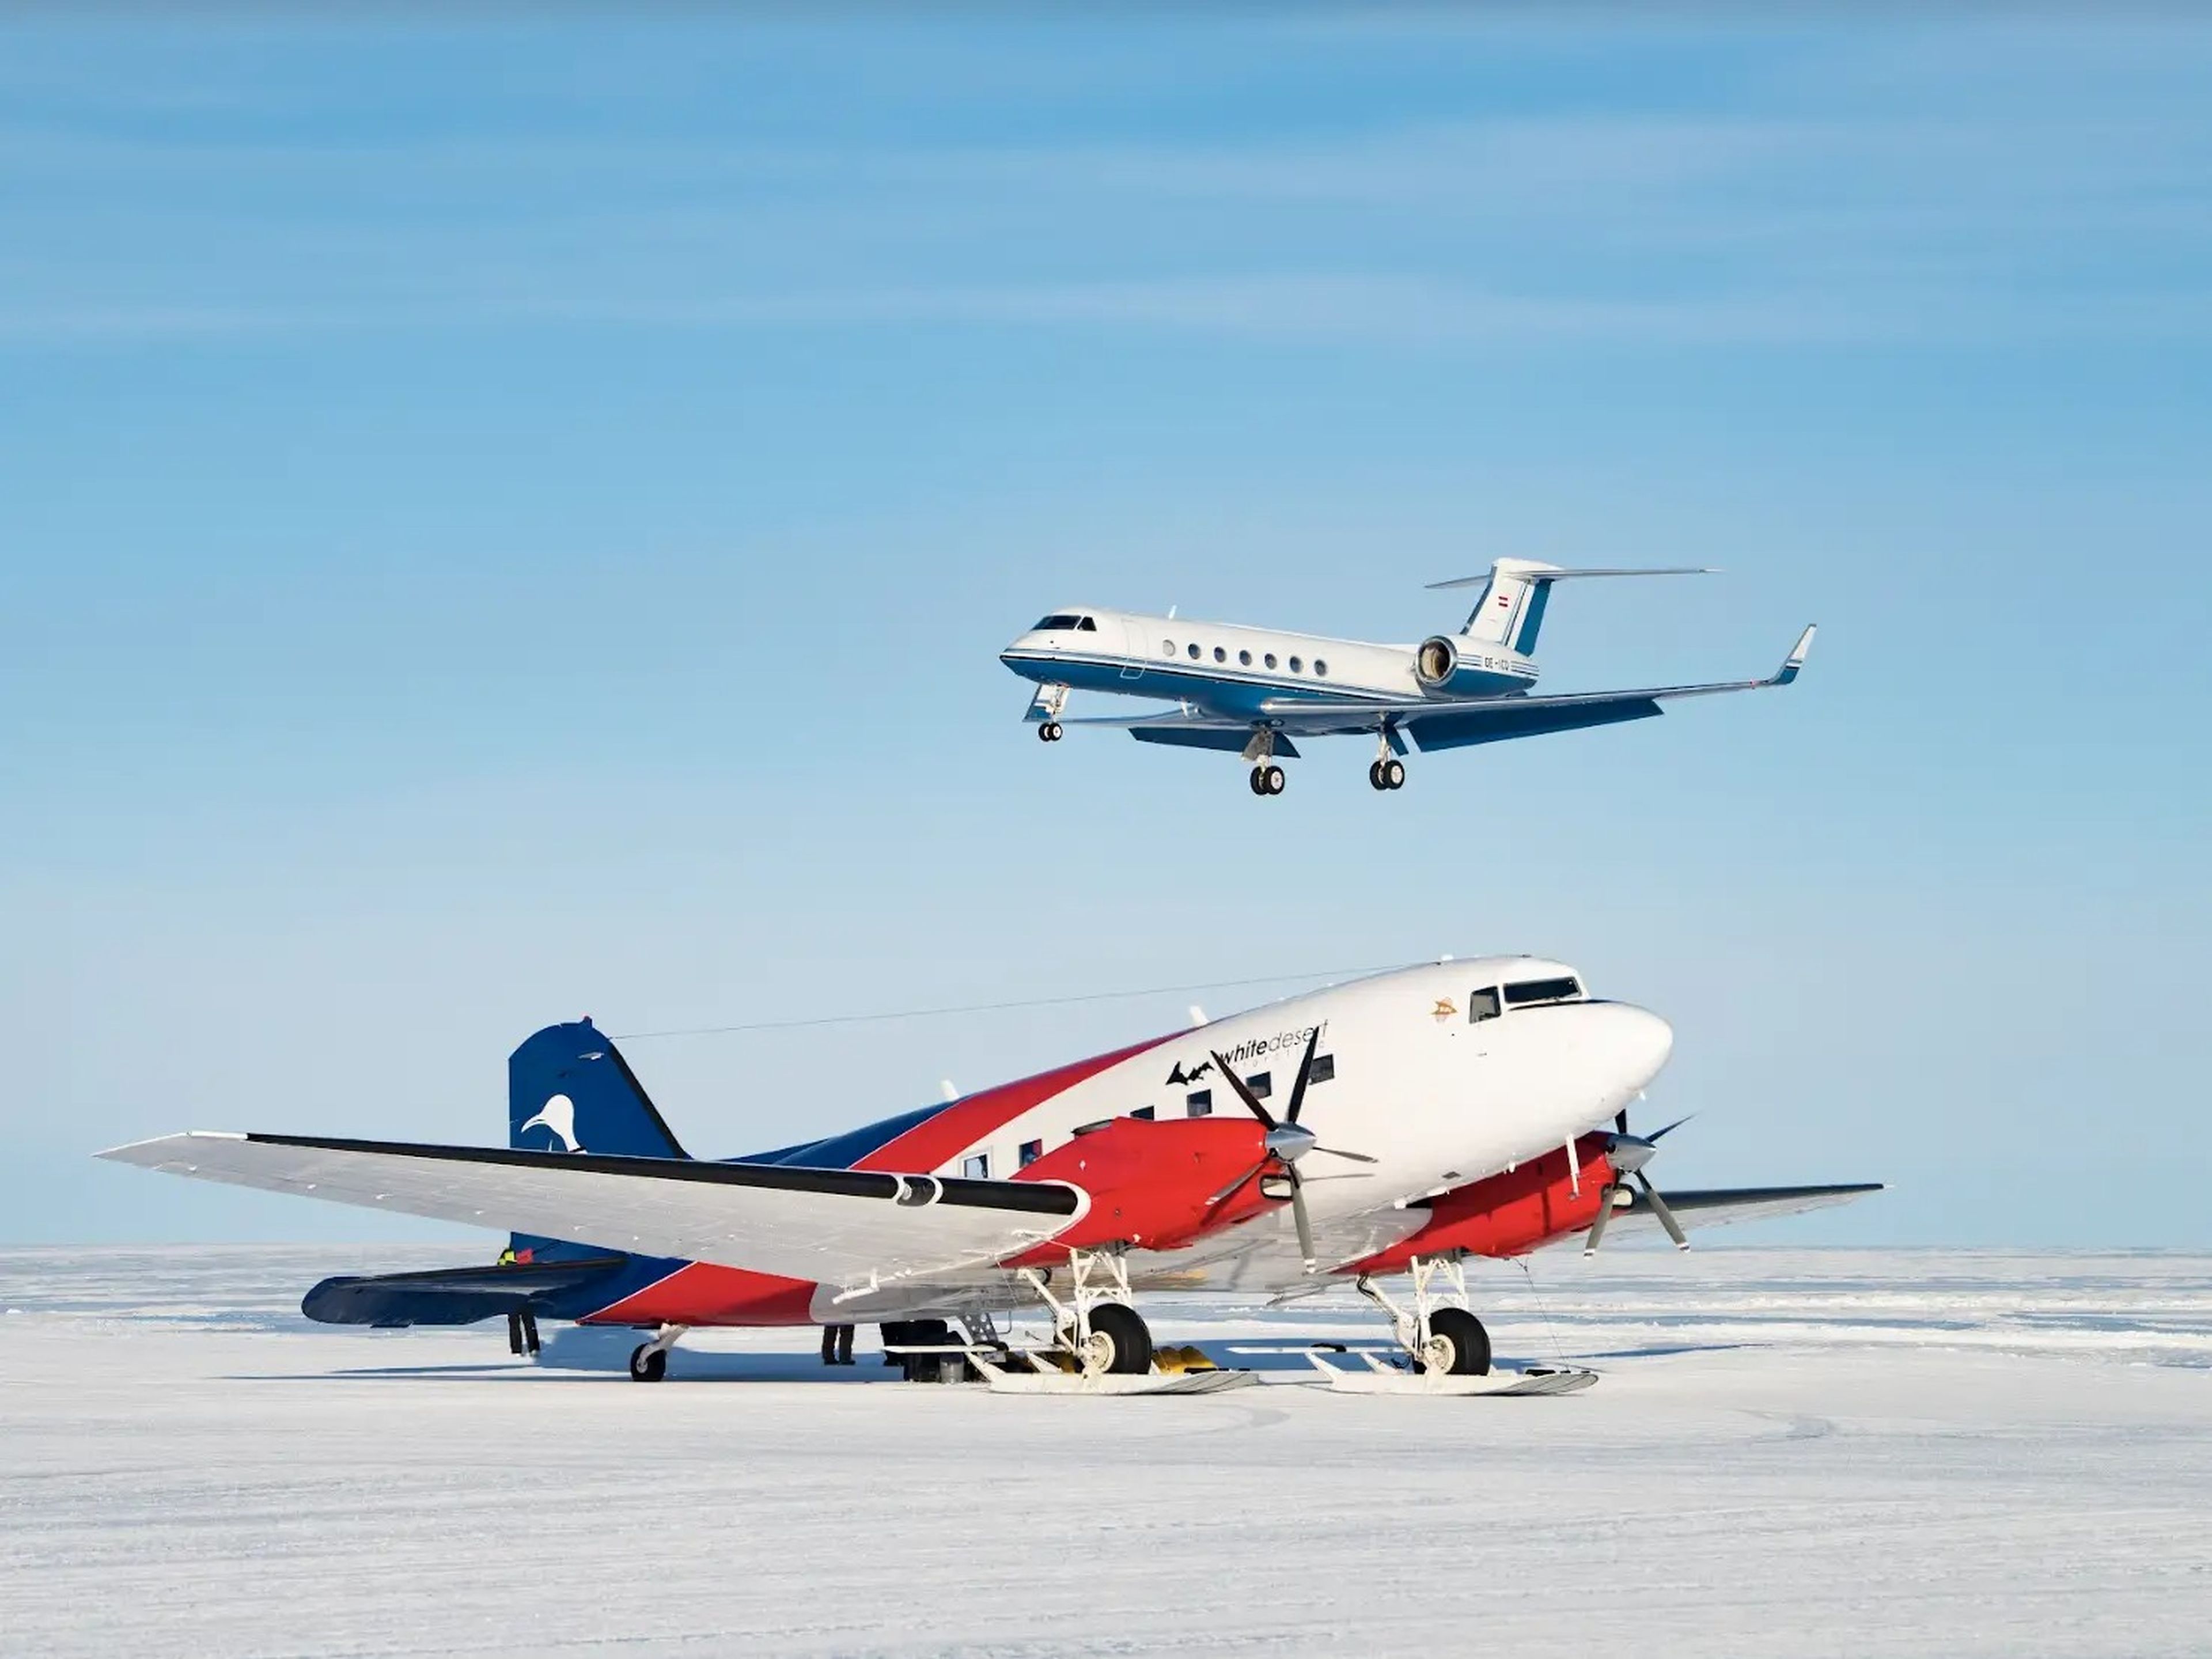 A ski plane on Wolf's Fang Runway while the G550 is landing behind.